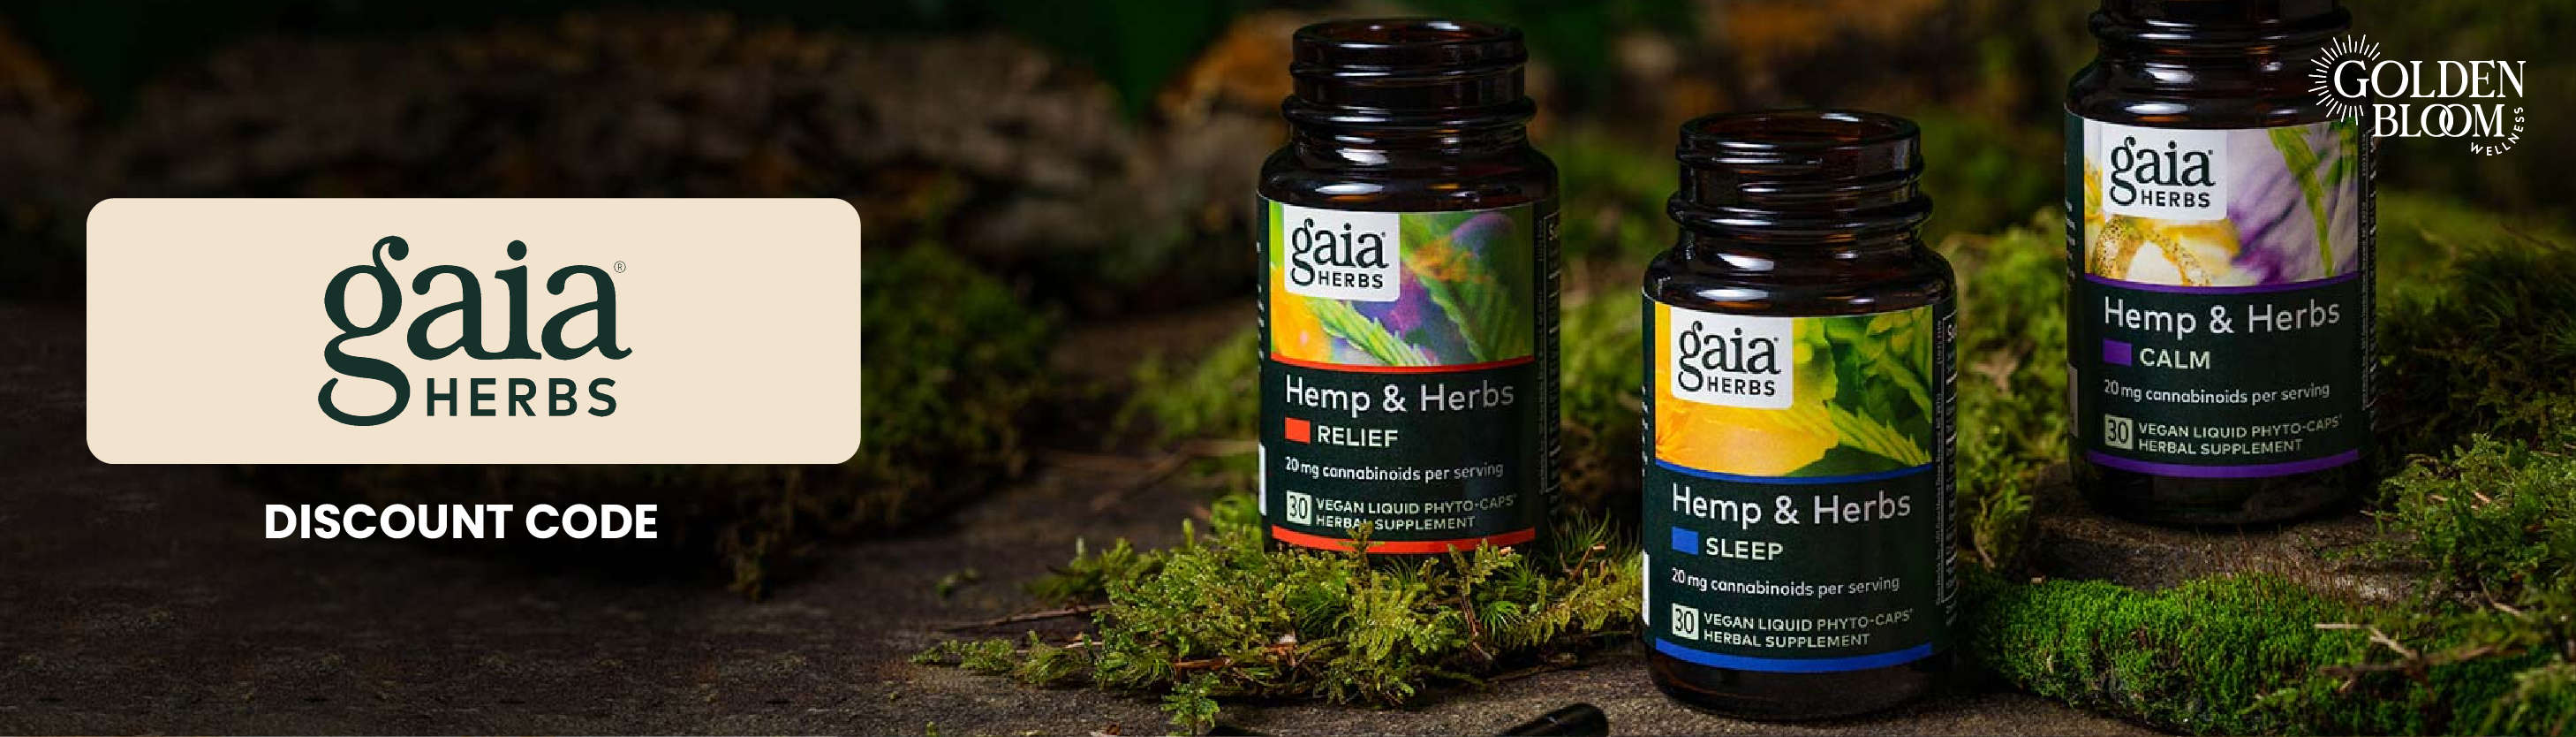 Gaia Herbs Featured Image Banner